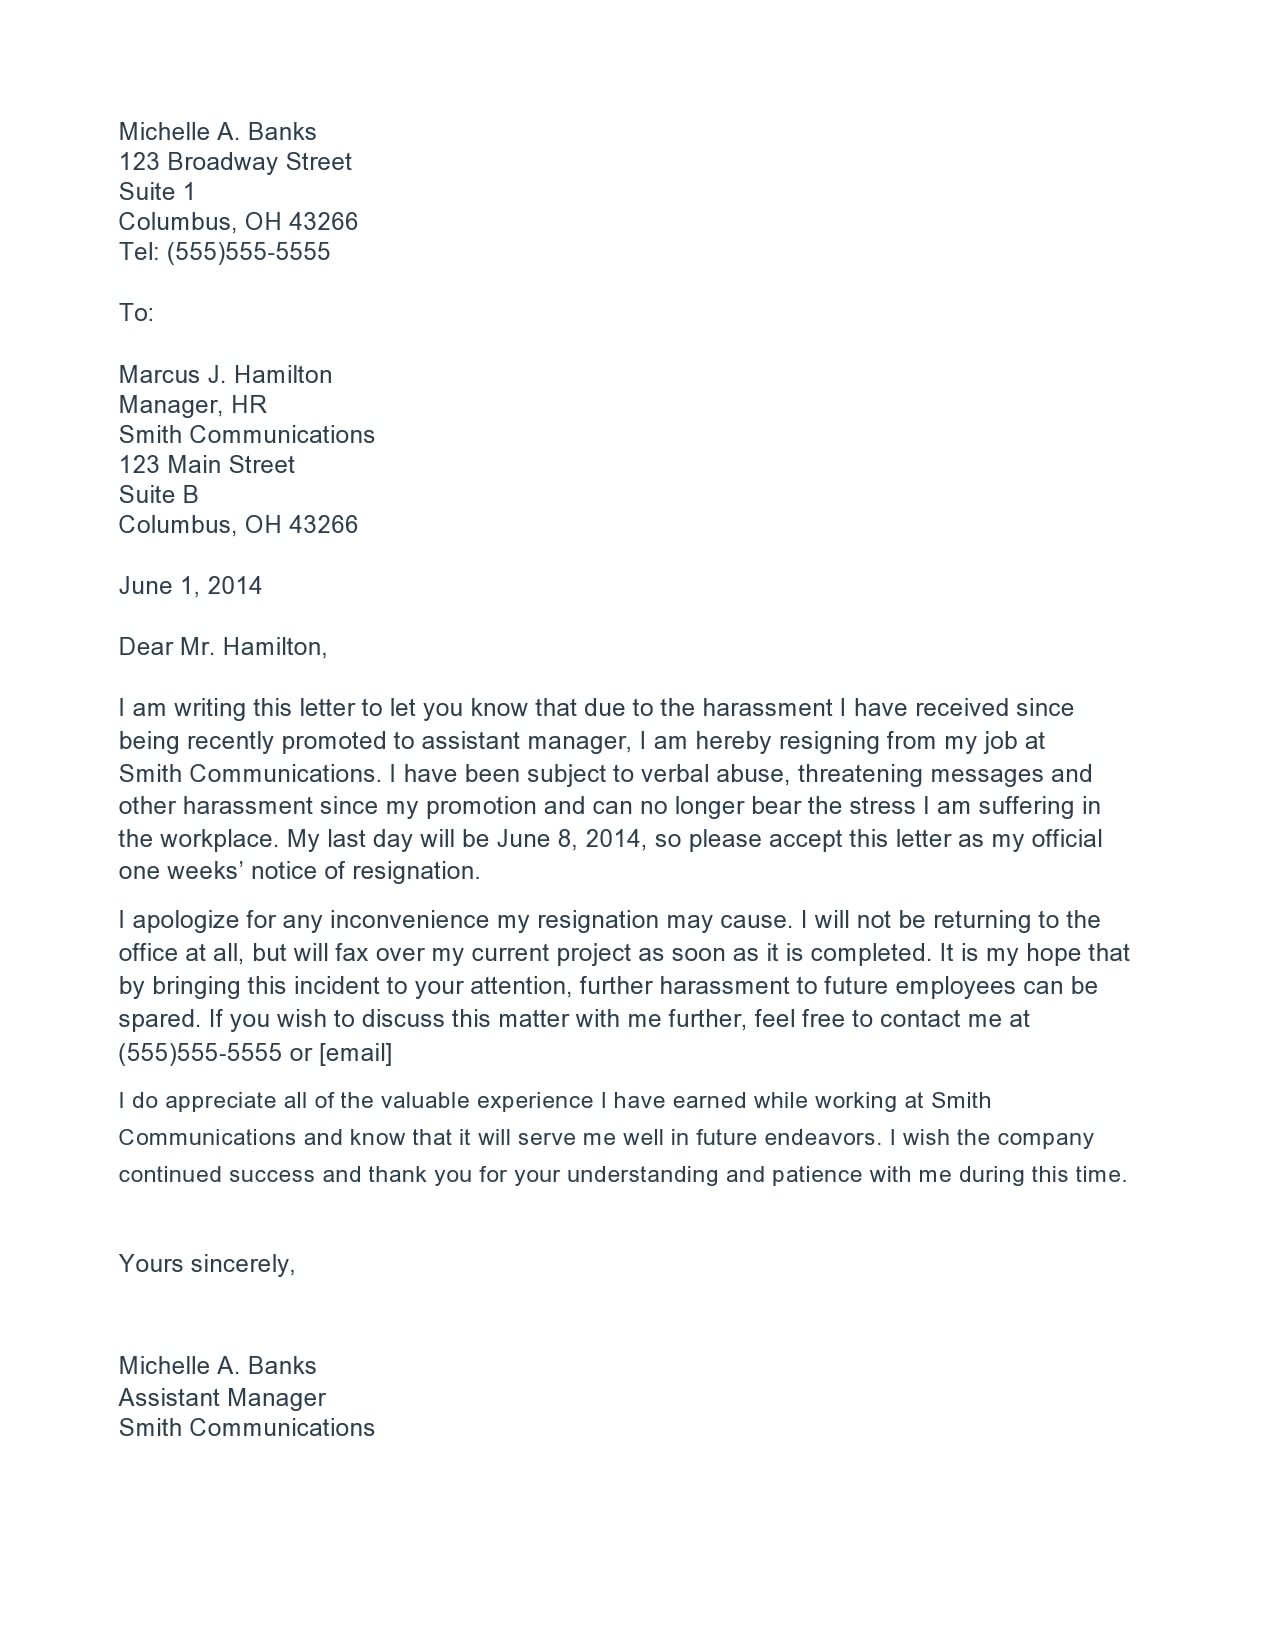 36+ Resignation Letter Due To Harassment Templates - PaulinaIlham